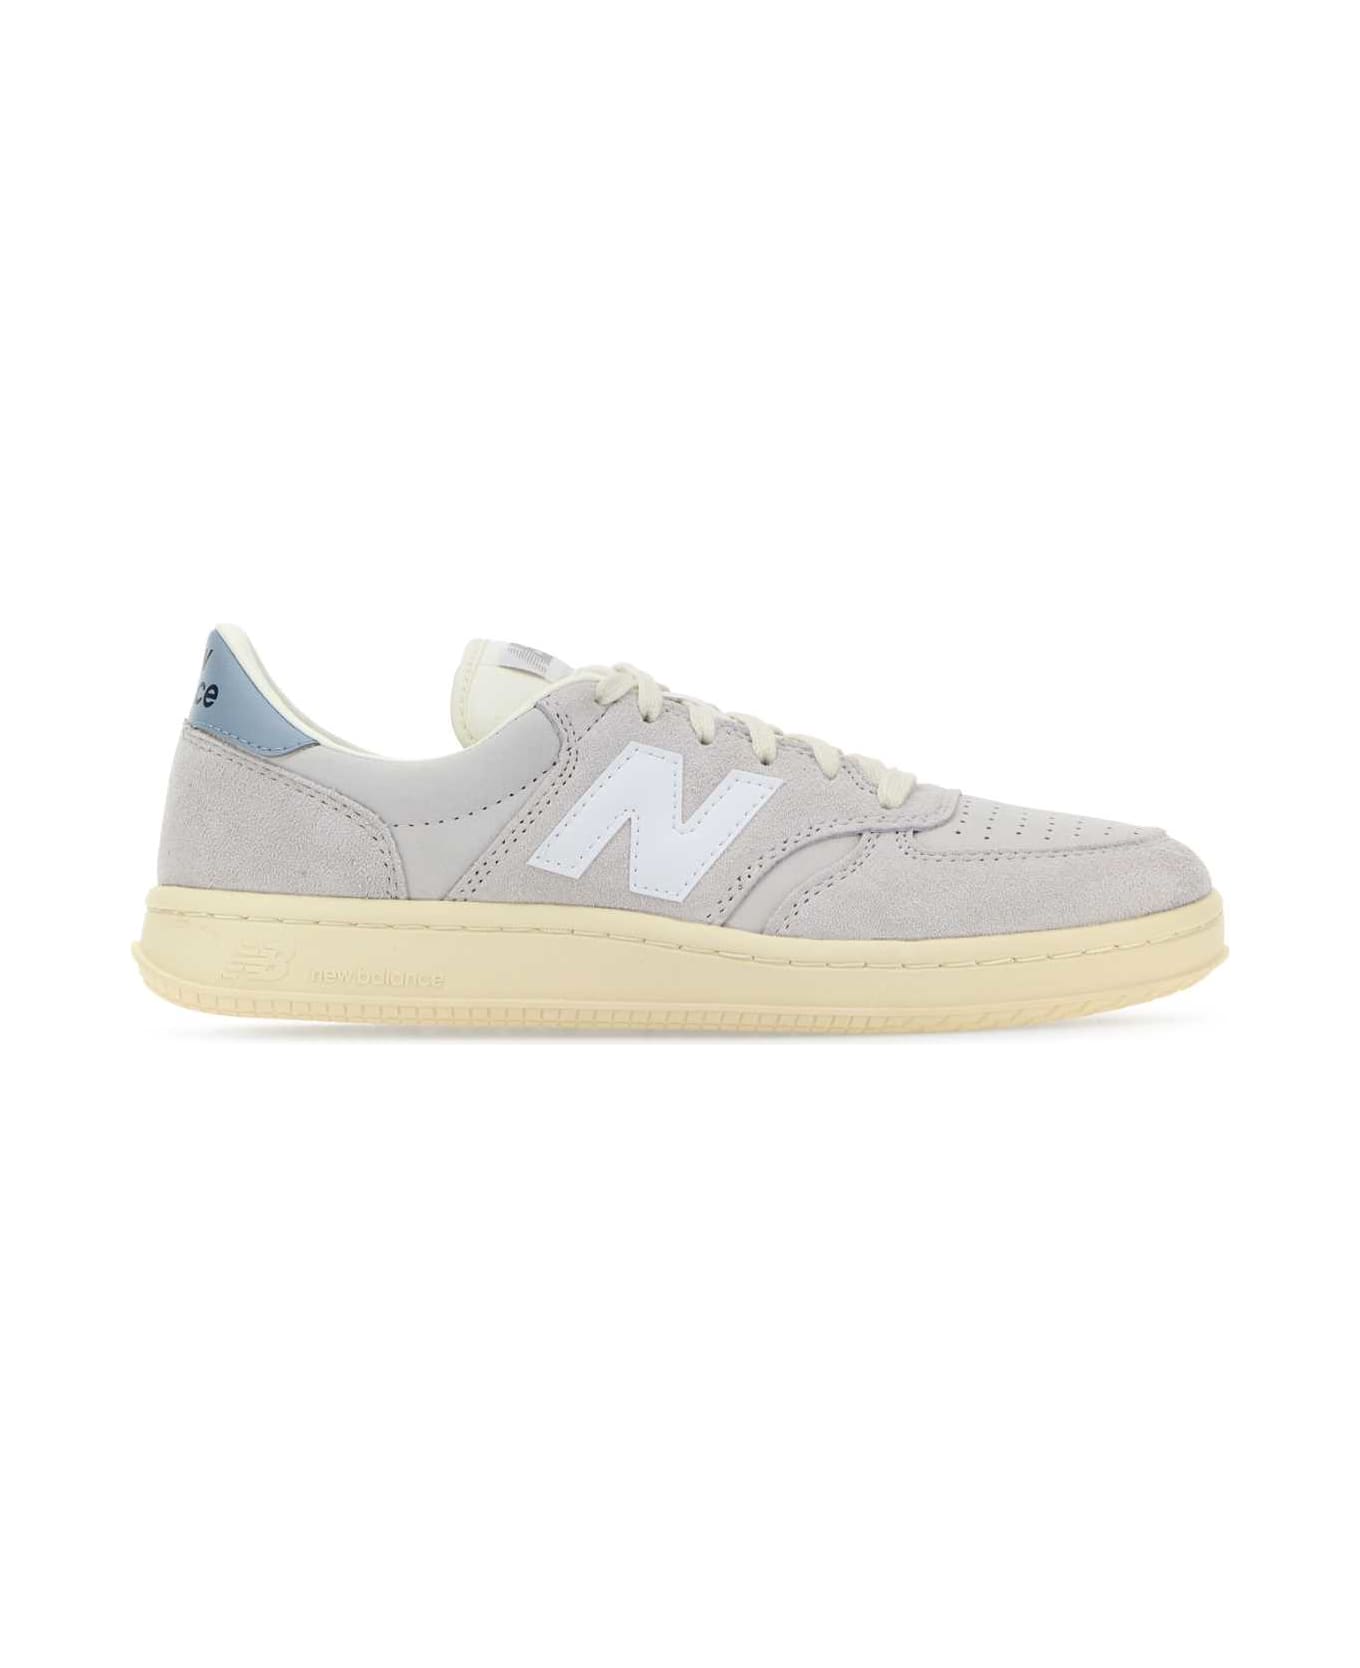 New Balance Light Grey Suede T500 Sneakers - OFFWHITE スニーカー